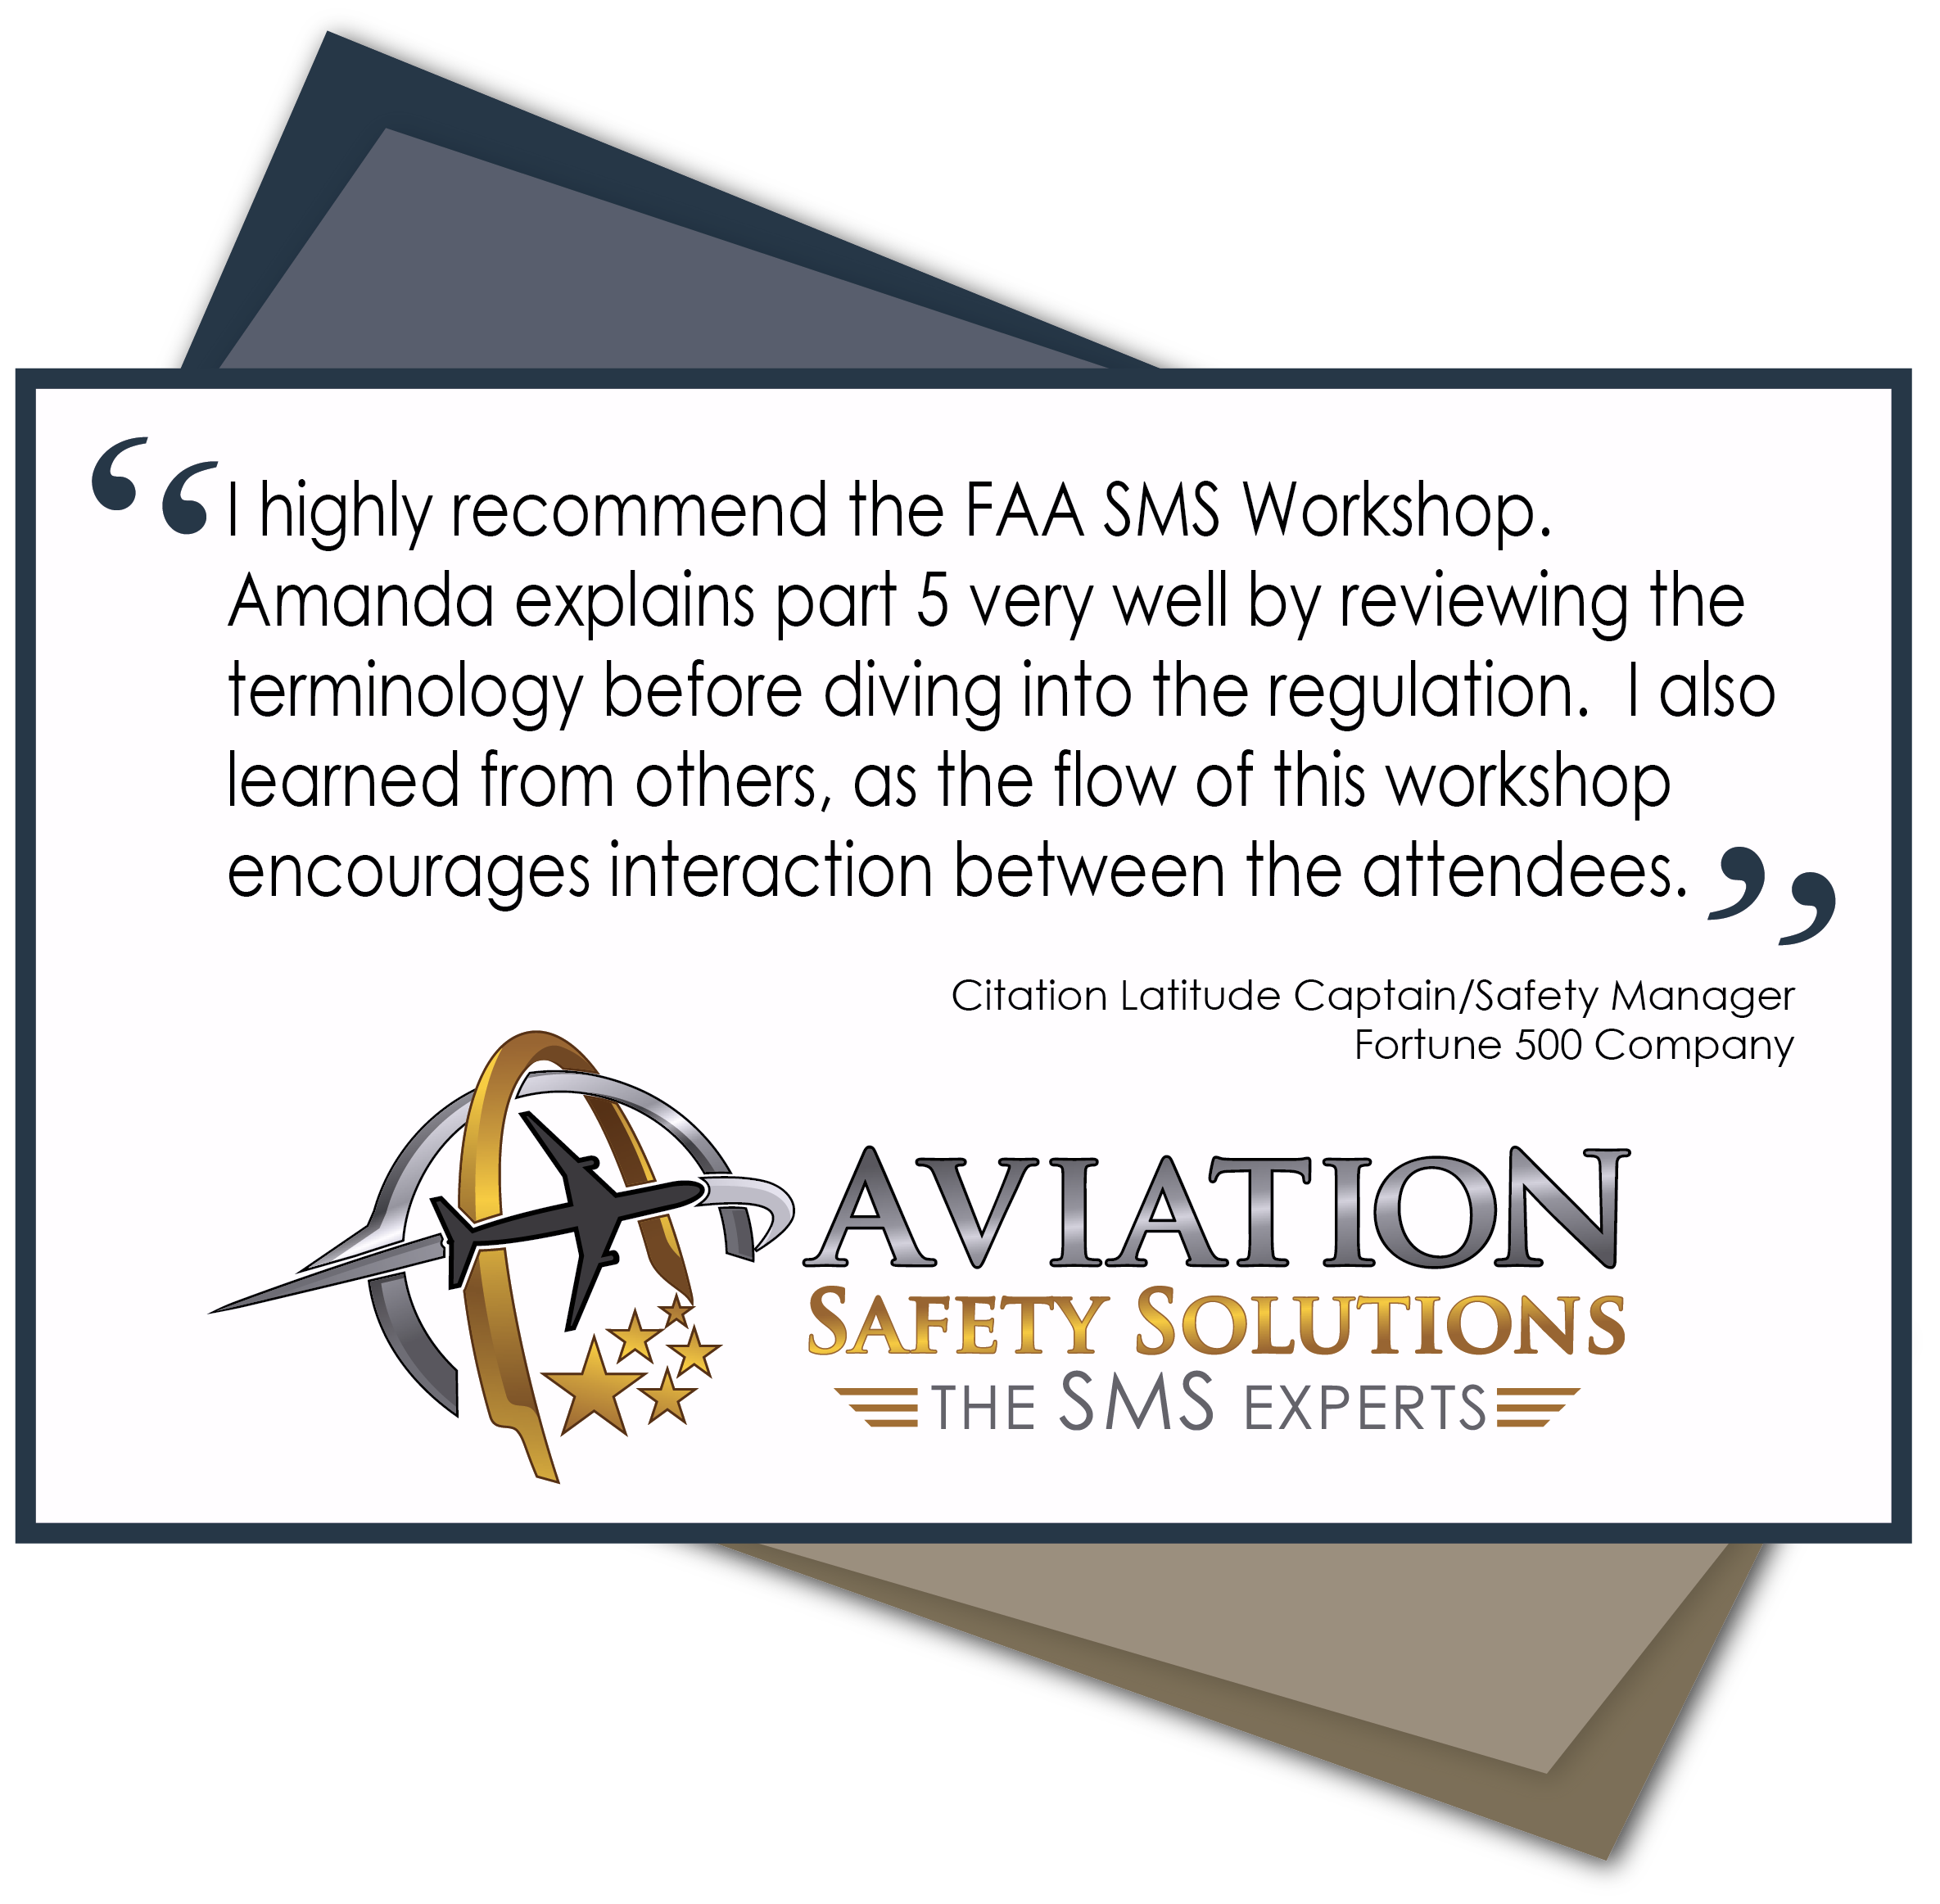 I highly recommend the FAA SMS Workshop.  Amanda explains part 5 very well by reviewing the terminology before diving into the regulation.  I also learned from others, as the flow of this class encourages interaction between the attendees.